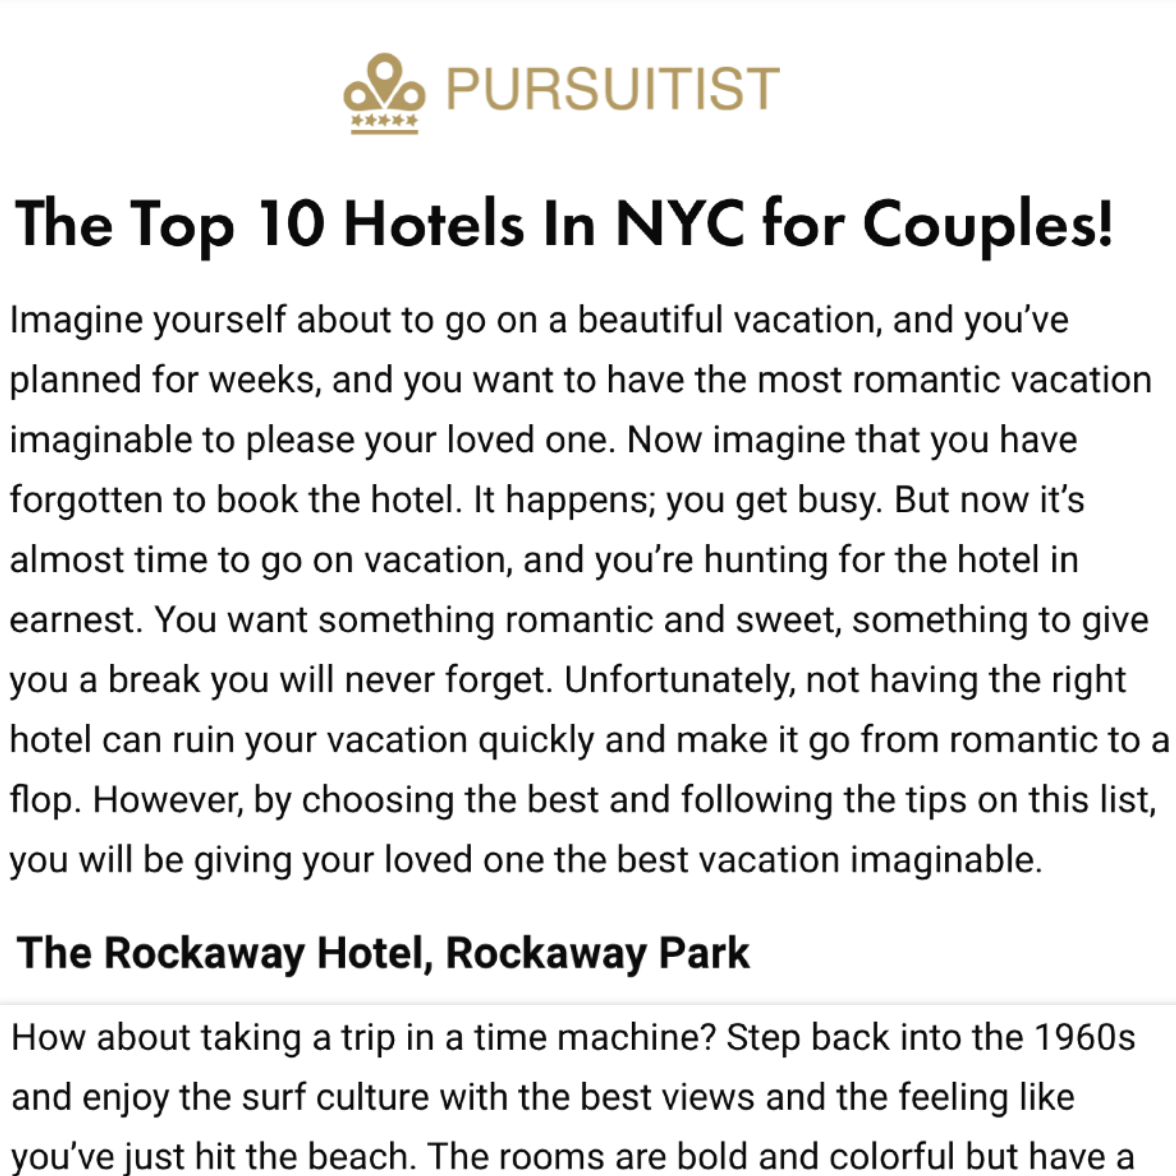 Article about The Rockaway Hotel in Pursuitist by David Lee  